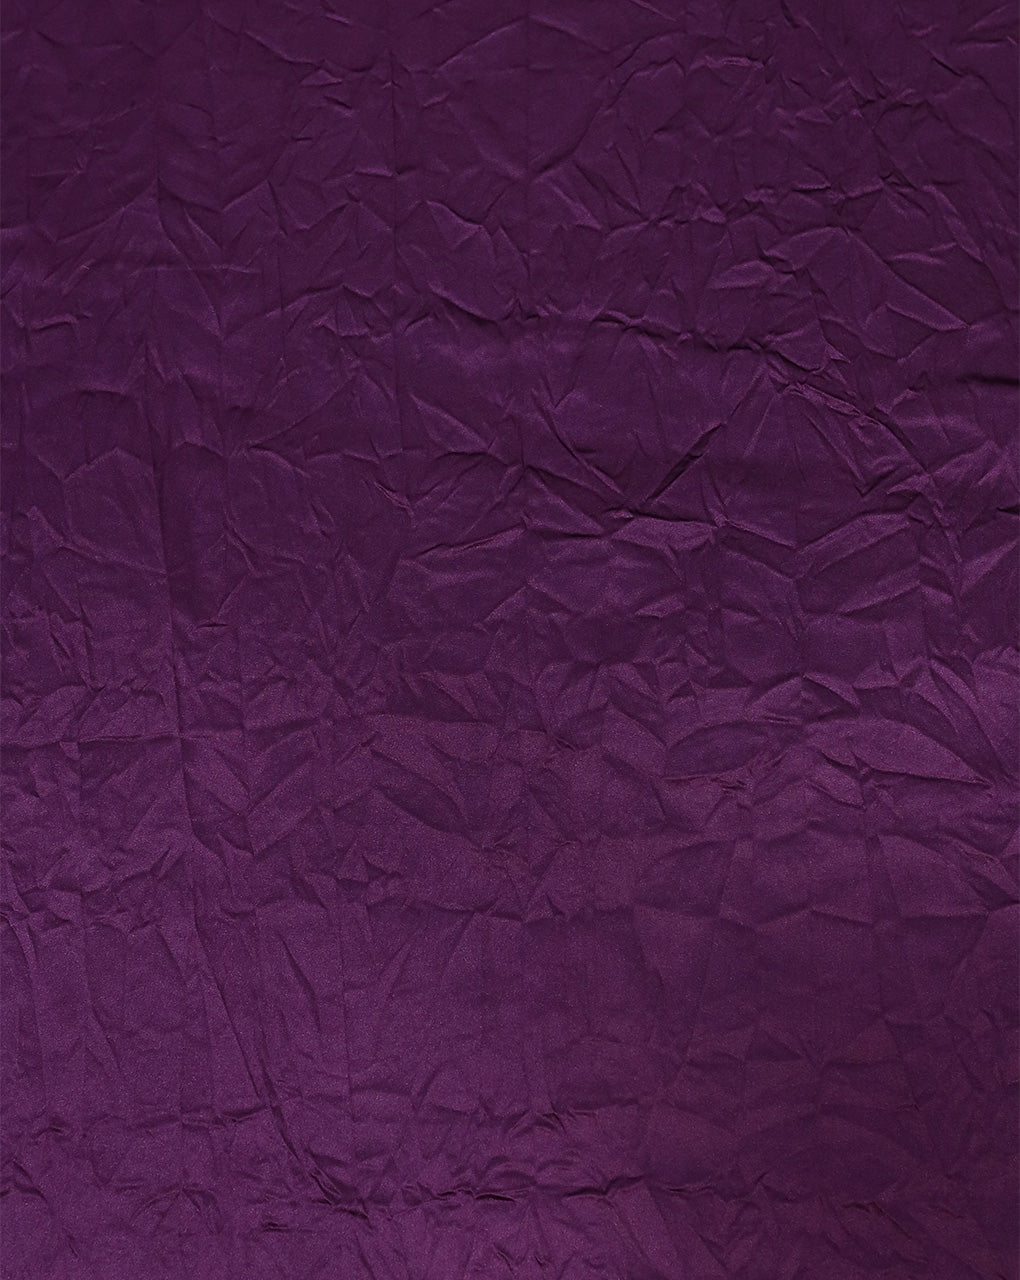 WINE BERRY CRUSHED POLYESTER SATIN FABRIC